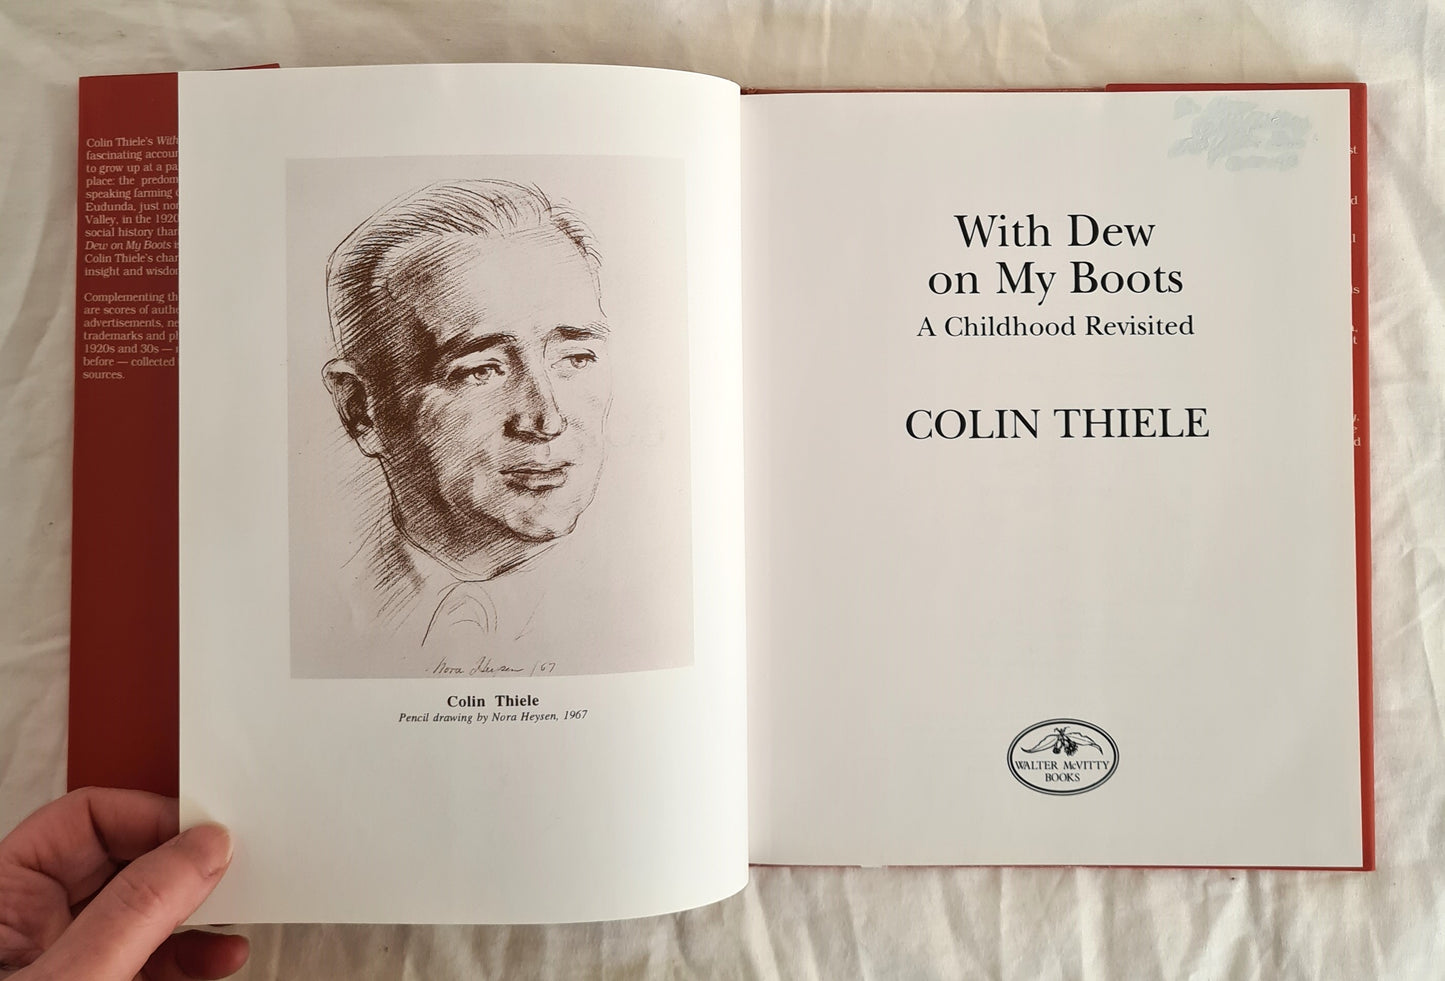 With Dew on My Boots by Colin Thiele